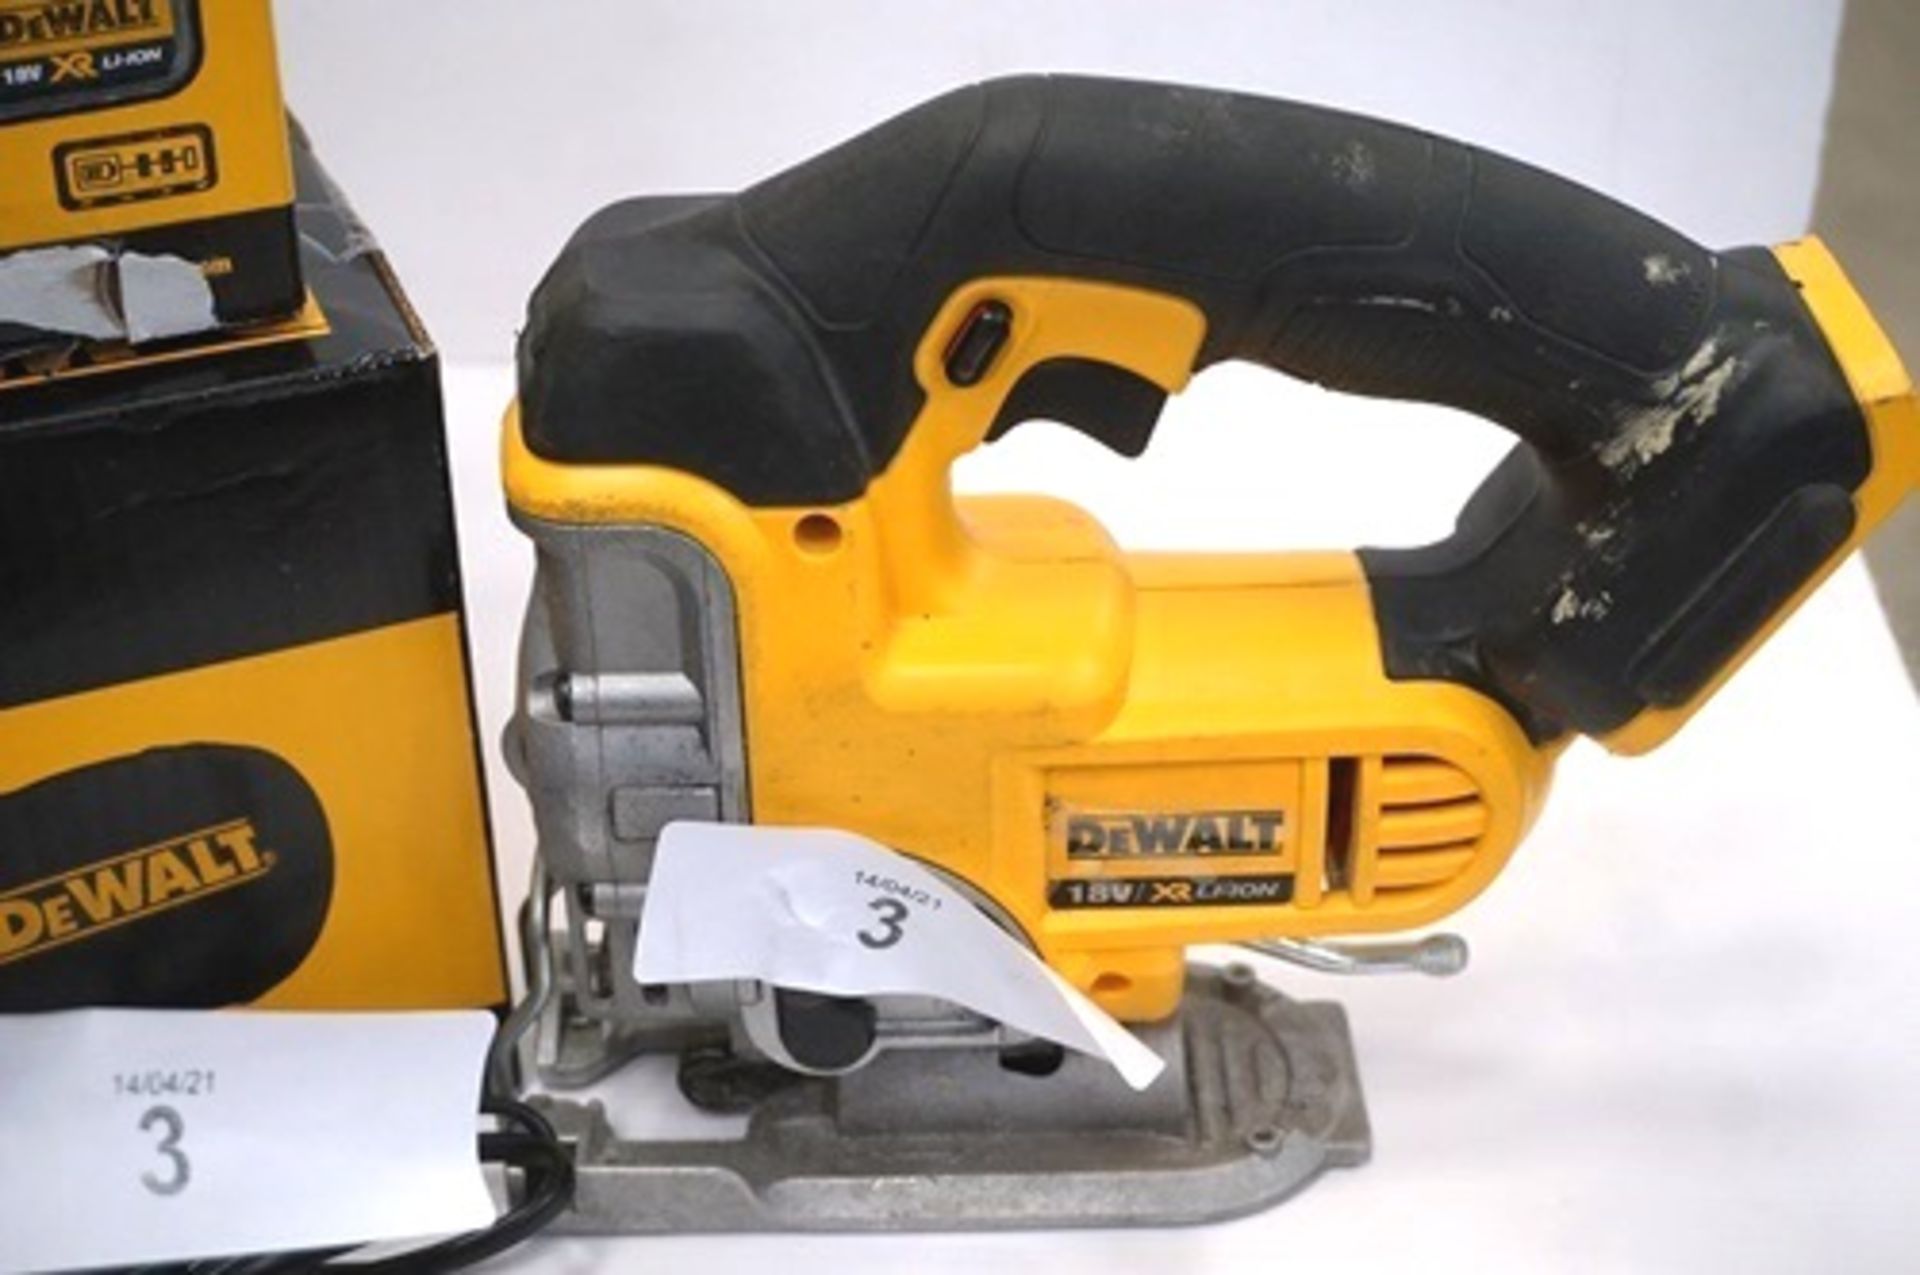 1 x DeWalt cordless jigsaw, model DCS331, second-hand, together with 2 x 18V batteries and - Image 2 of 5